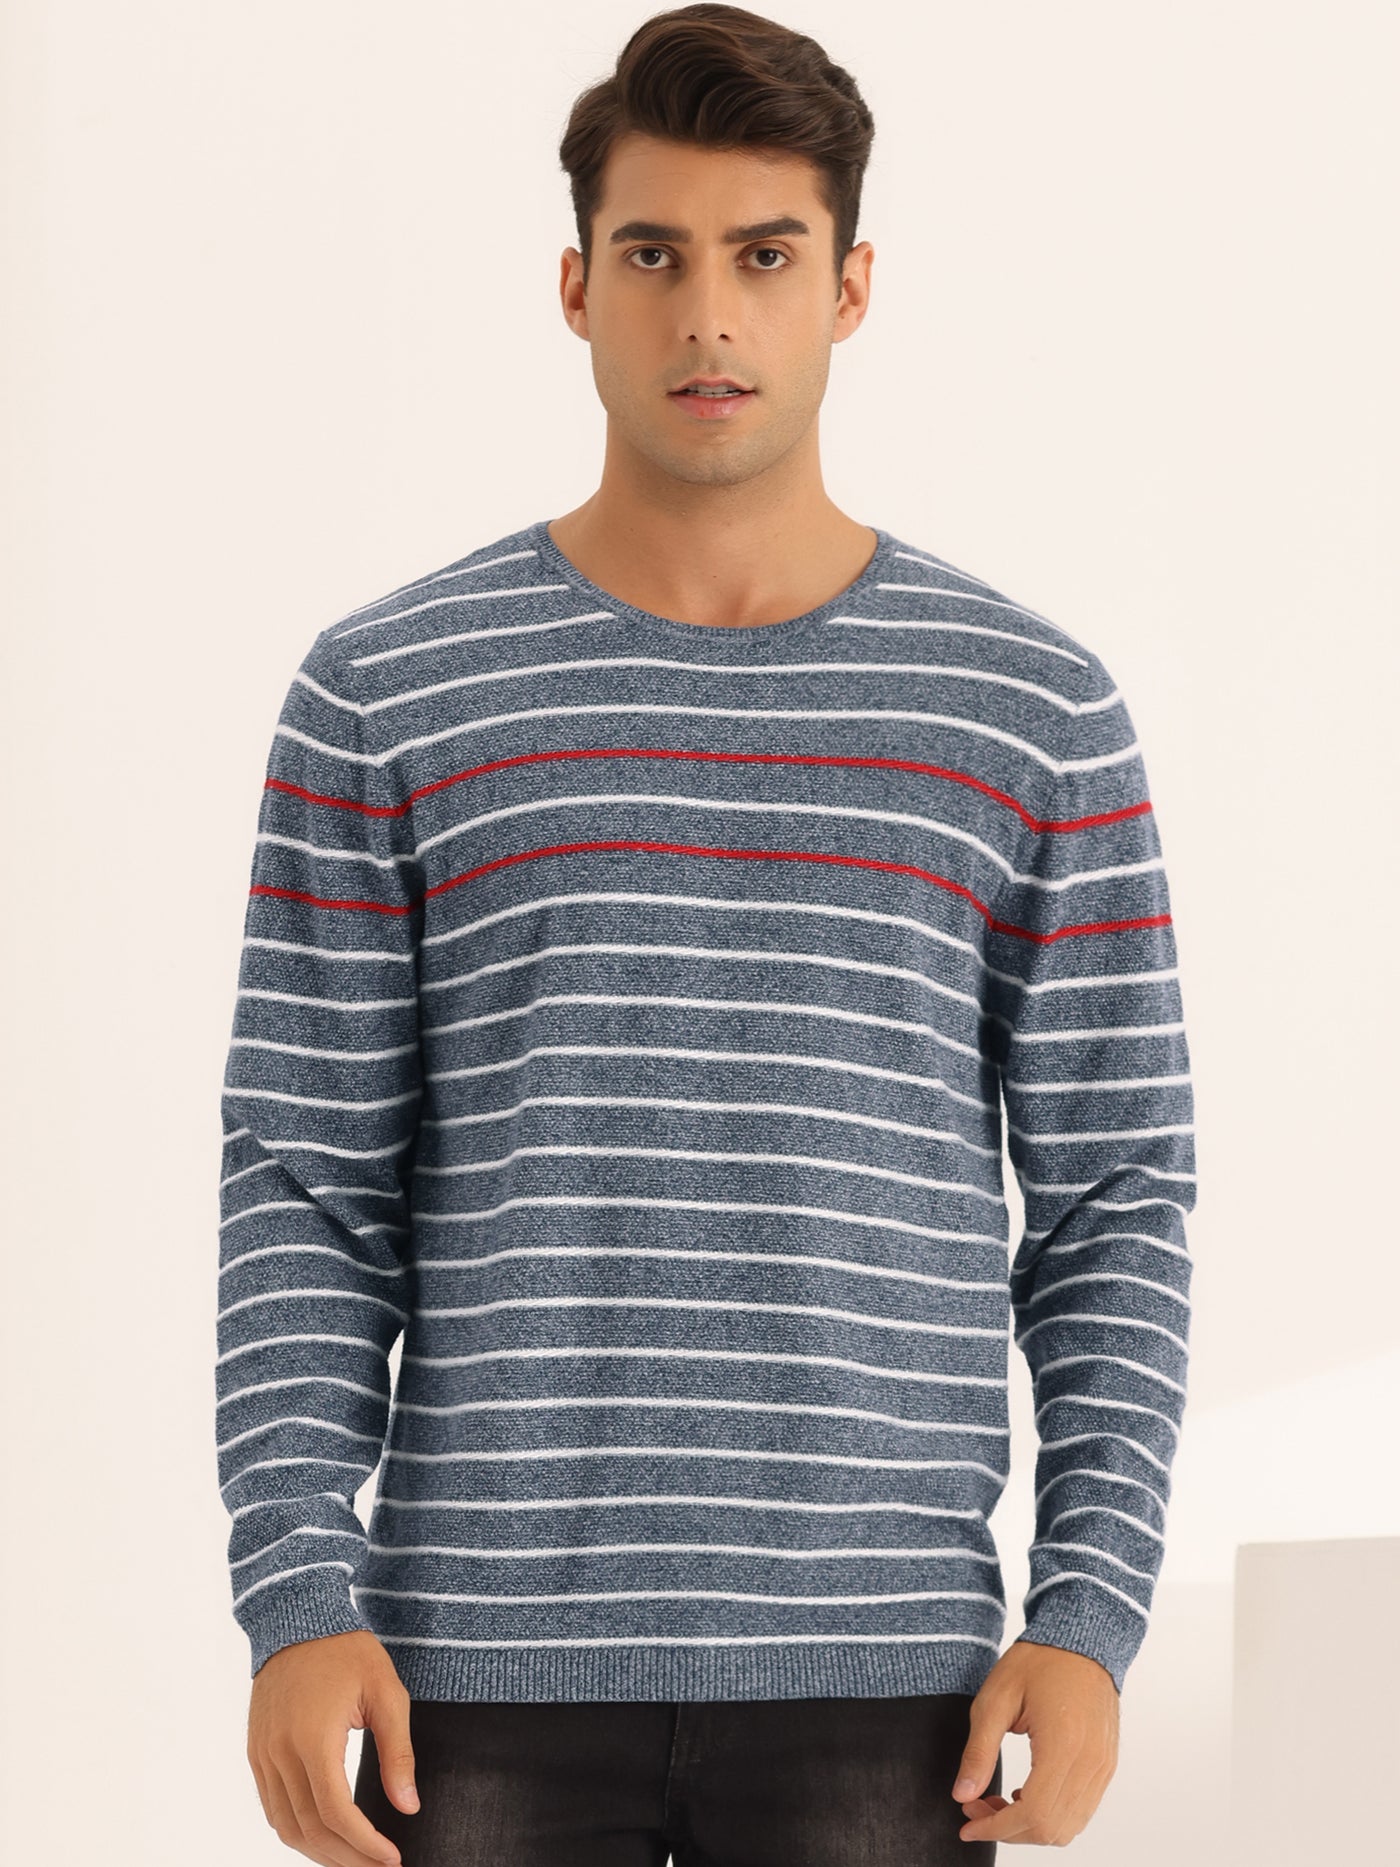 Bublédon Striped Sweaters for Men's Pullover Crew Neck Long Sleeves Knit Sweater